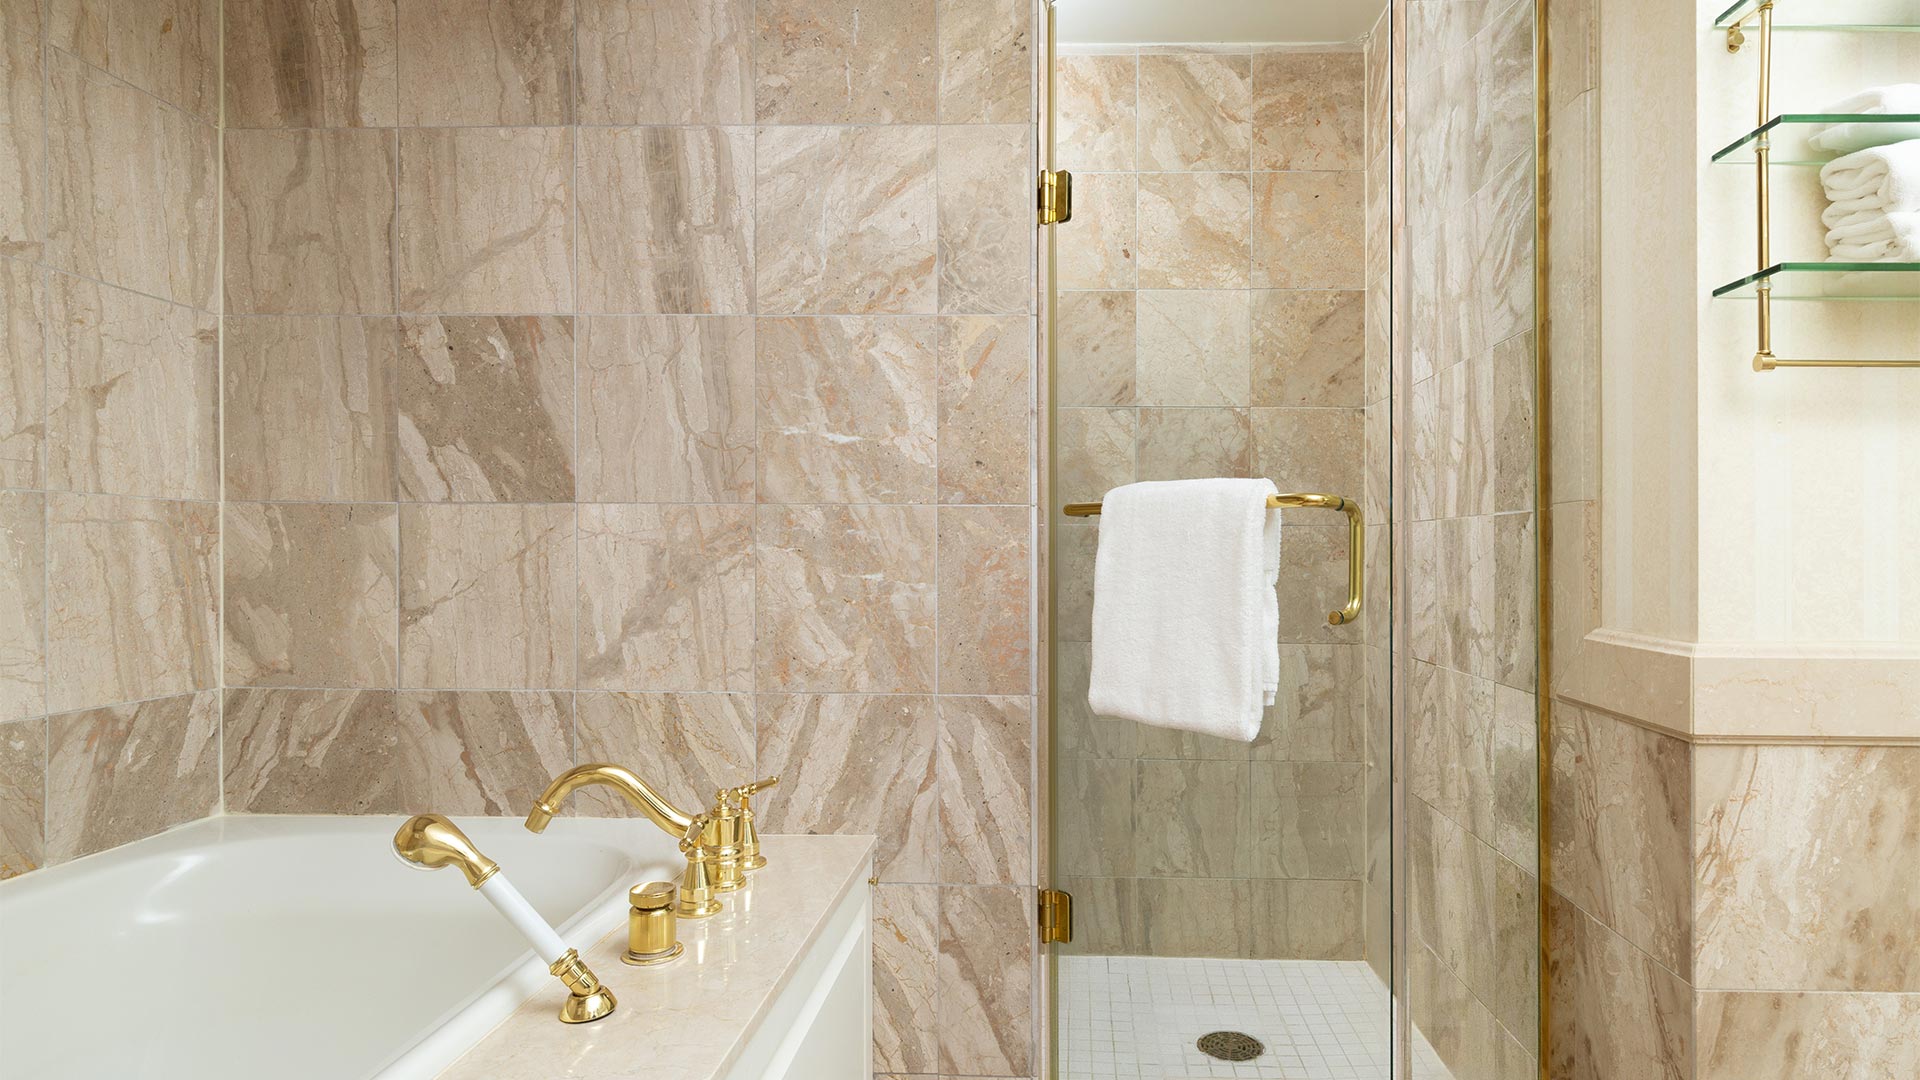 detail shot of the bathroom. The tiling is a neutral beige and the whirlpool bathtub is white with gold hardware. There is also a small shower next to the bathtub.